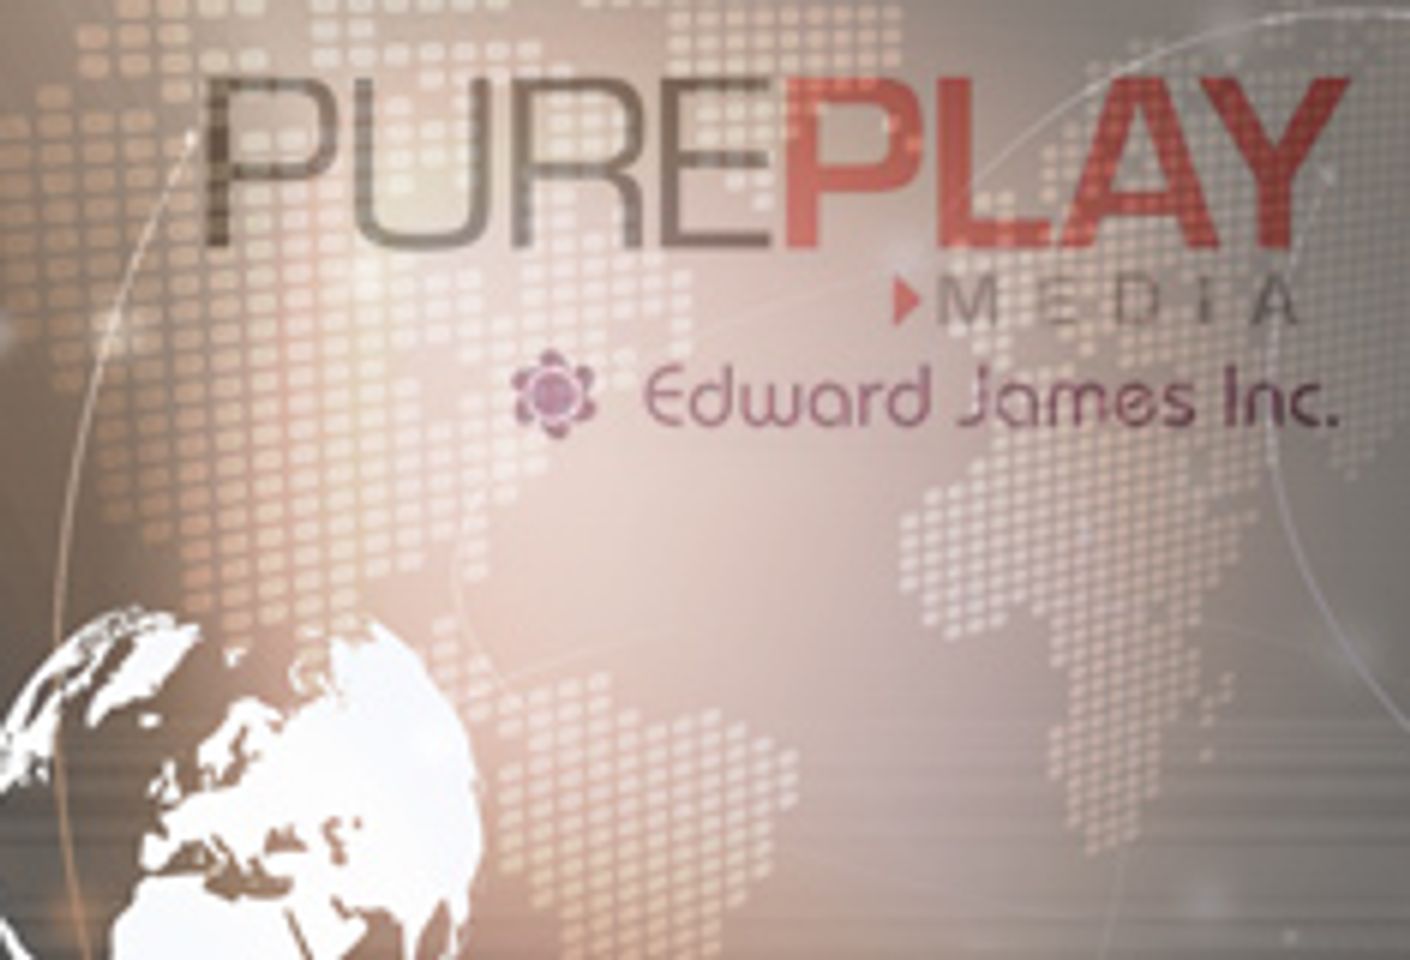 Pure Play, Edward James Sign Distro Deal